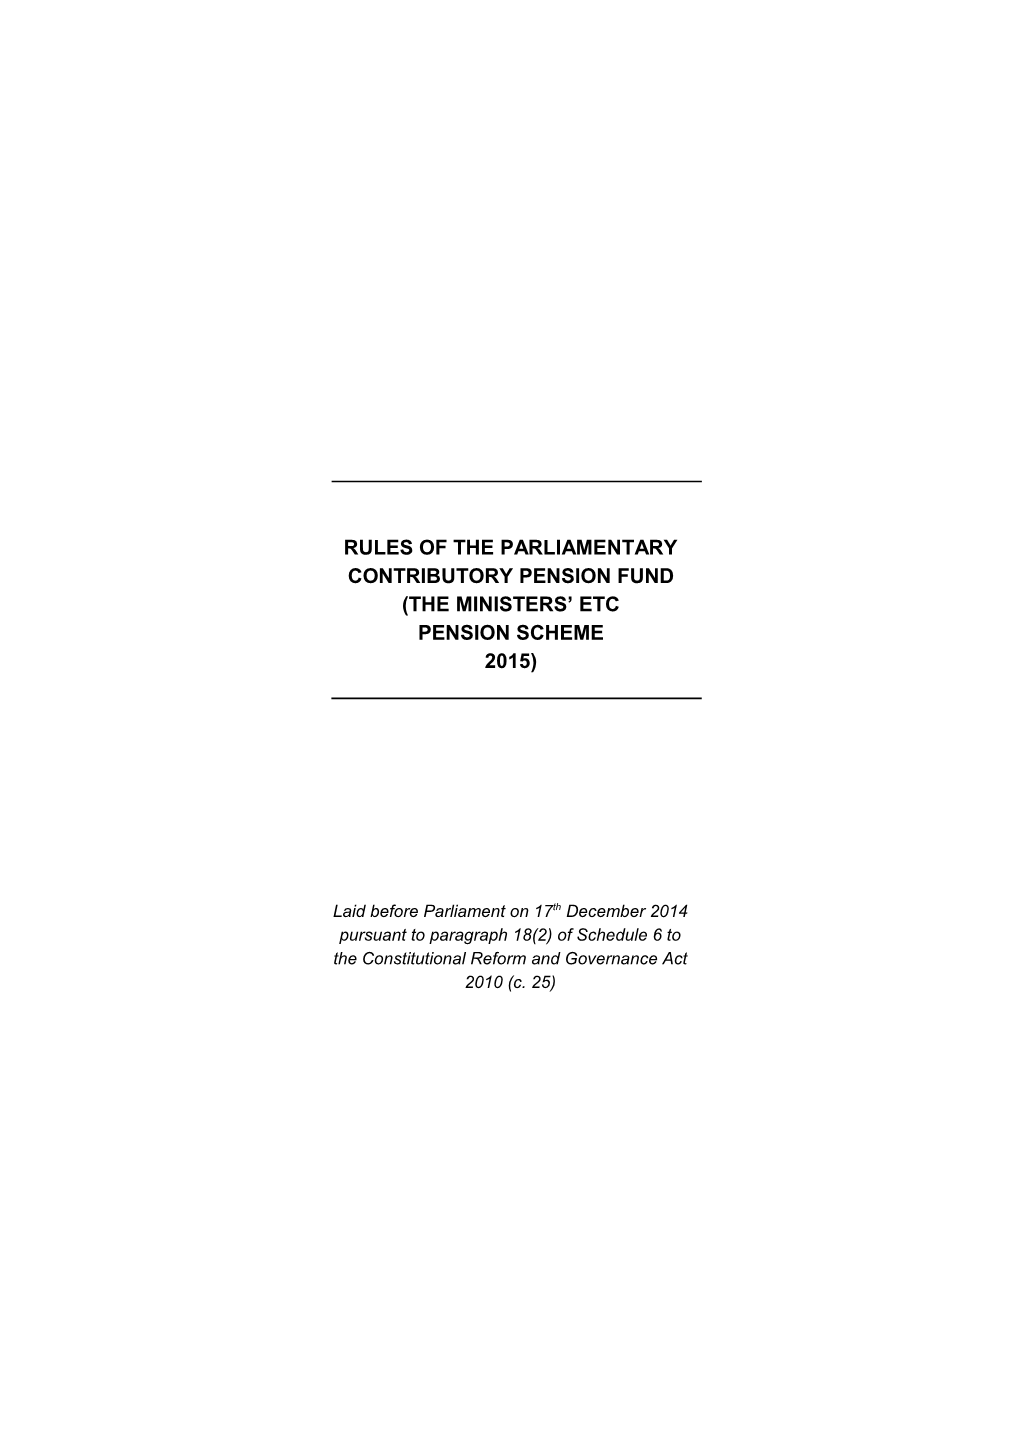 Rules of the Parliamentary Contributory Pension Fund